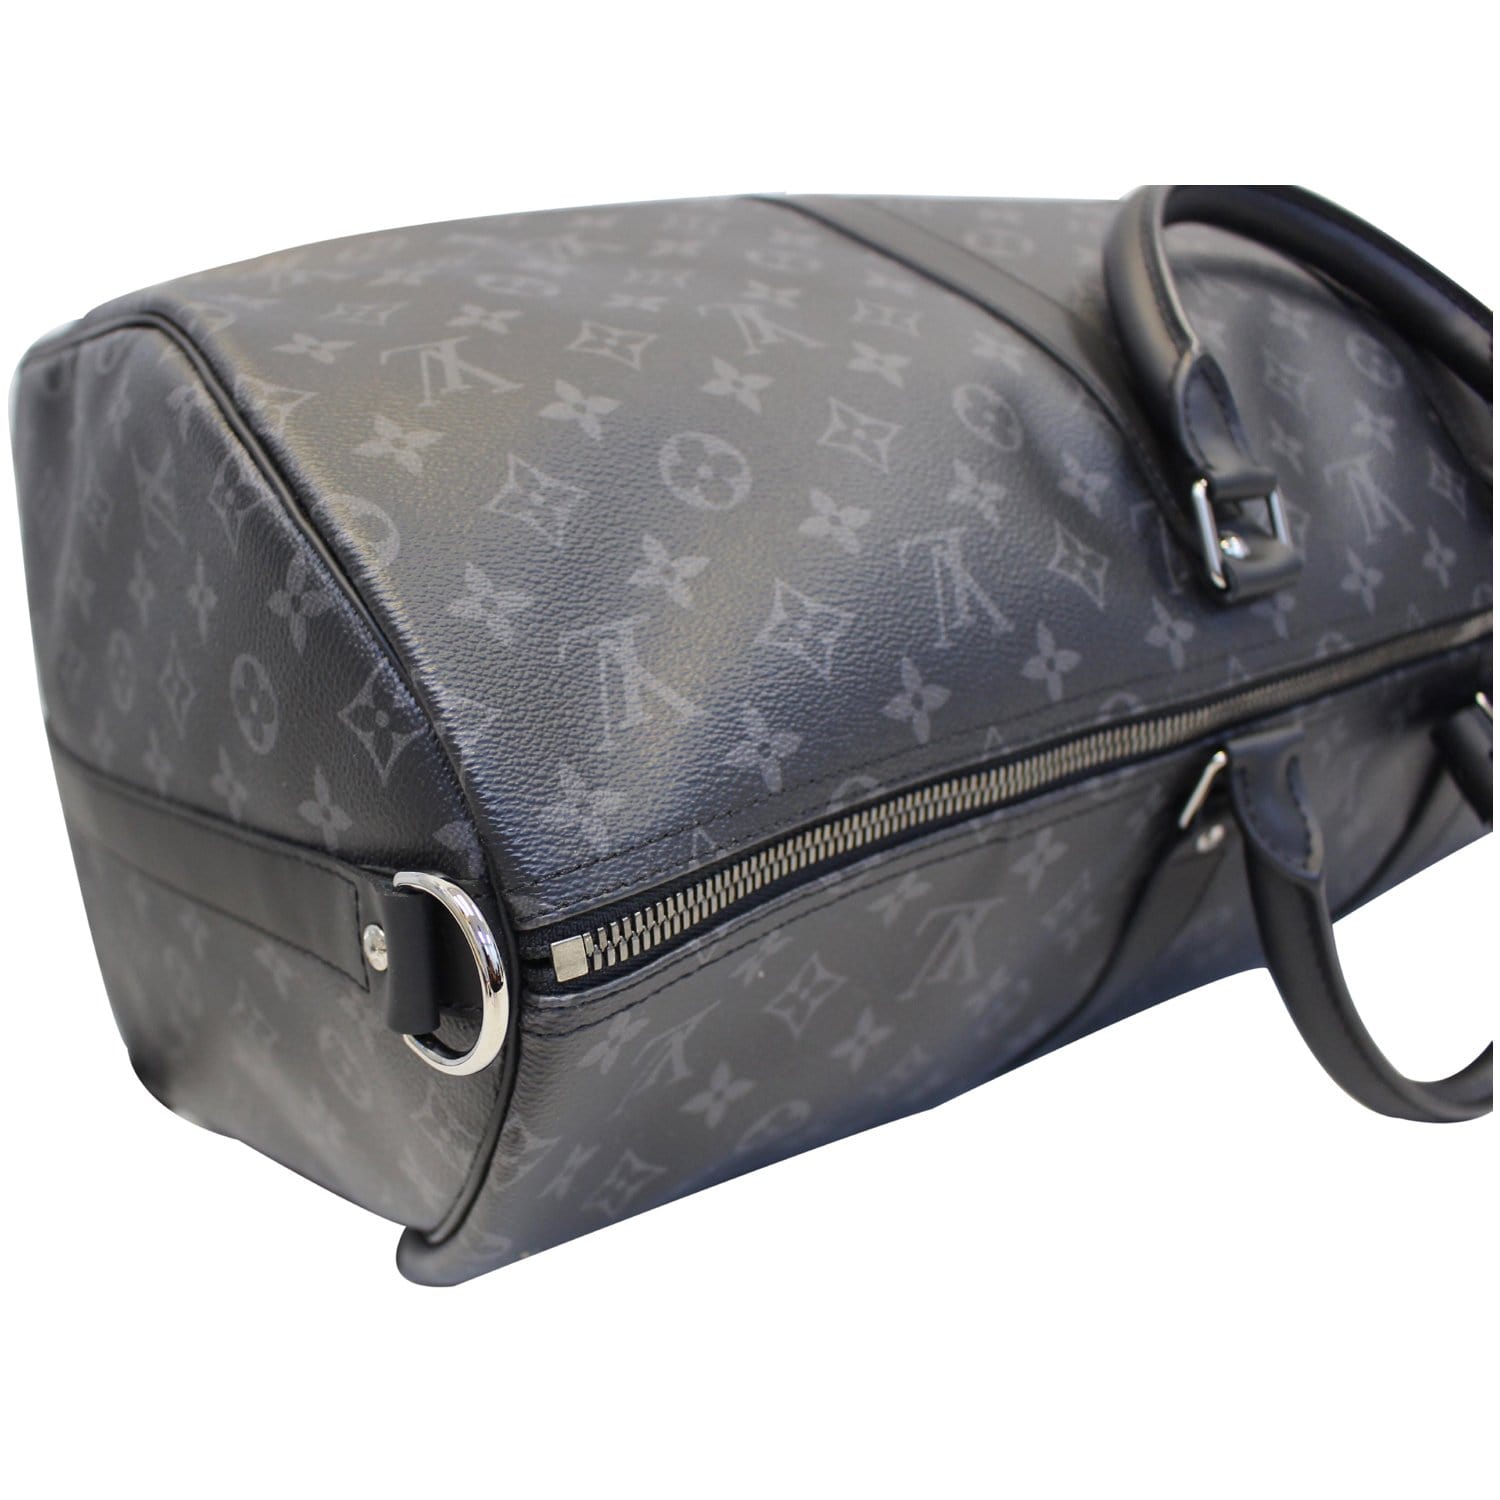 Keepall 55 Bandouliere in Monogram Eclipse Canvas